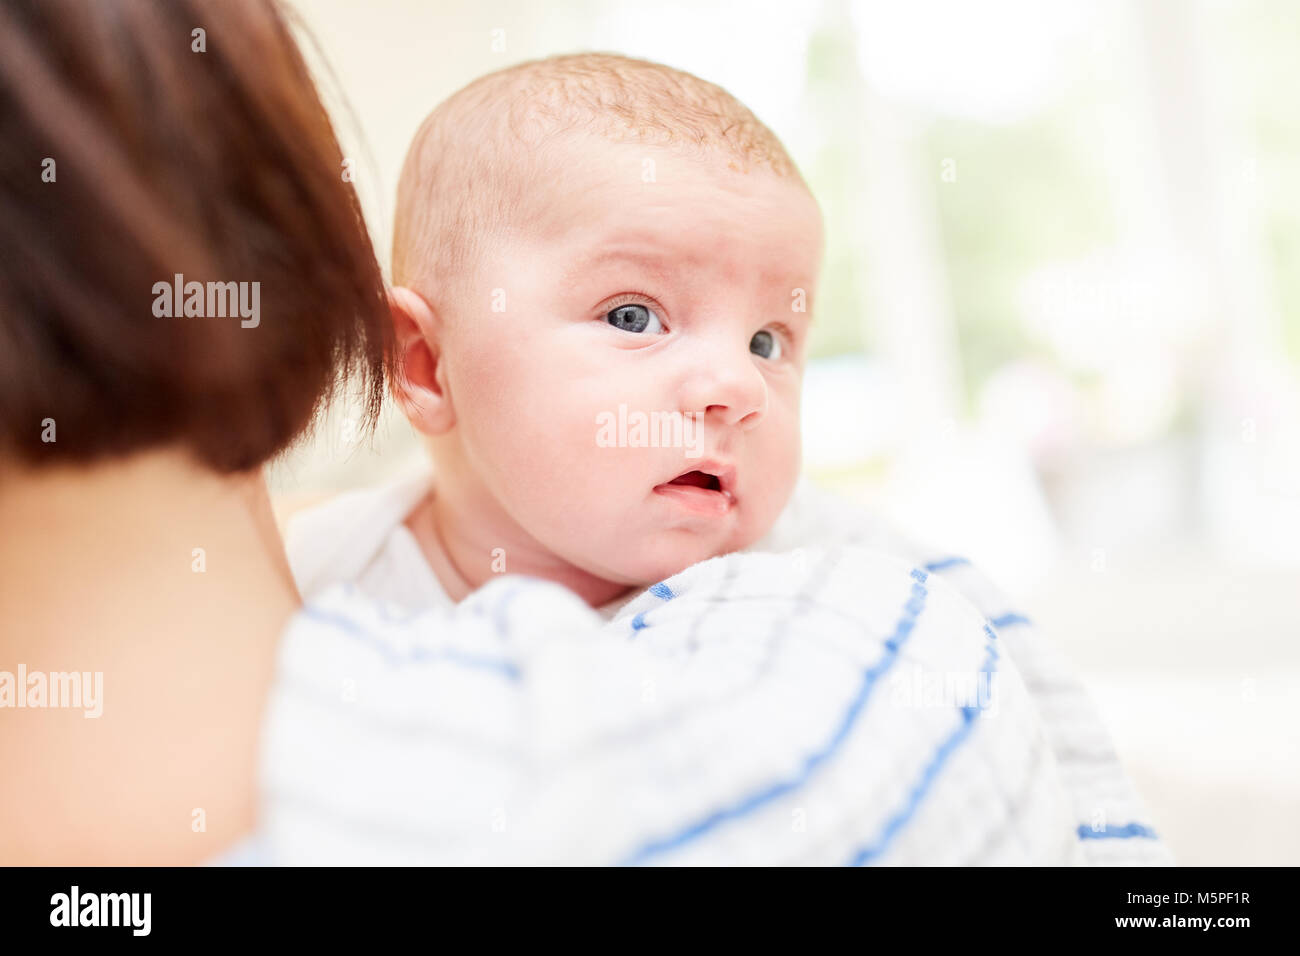 Newborn baby looks curiously at the mother's arms Stock Photo